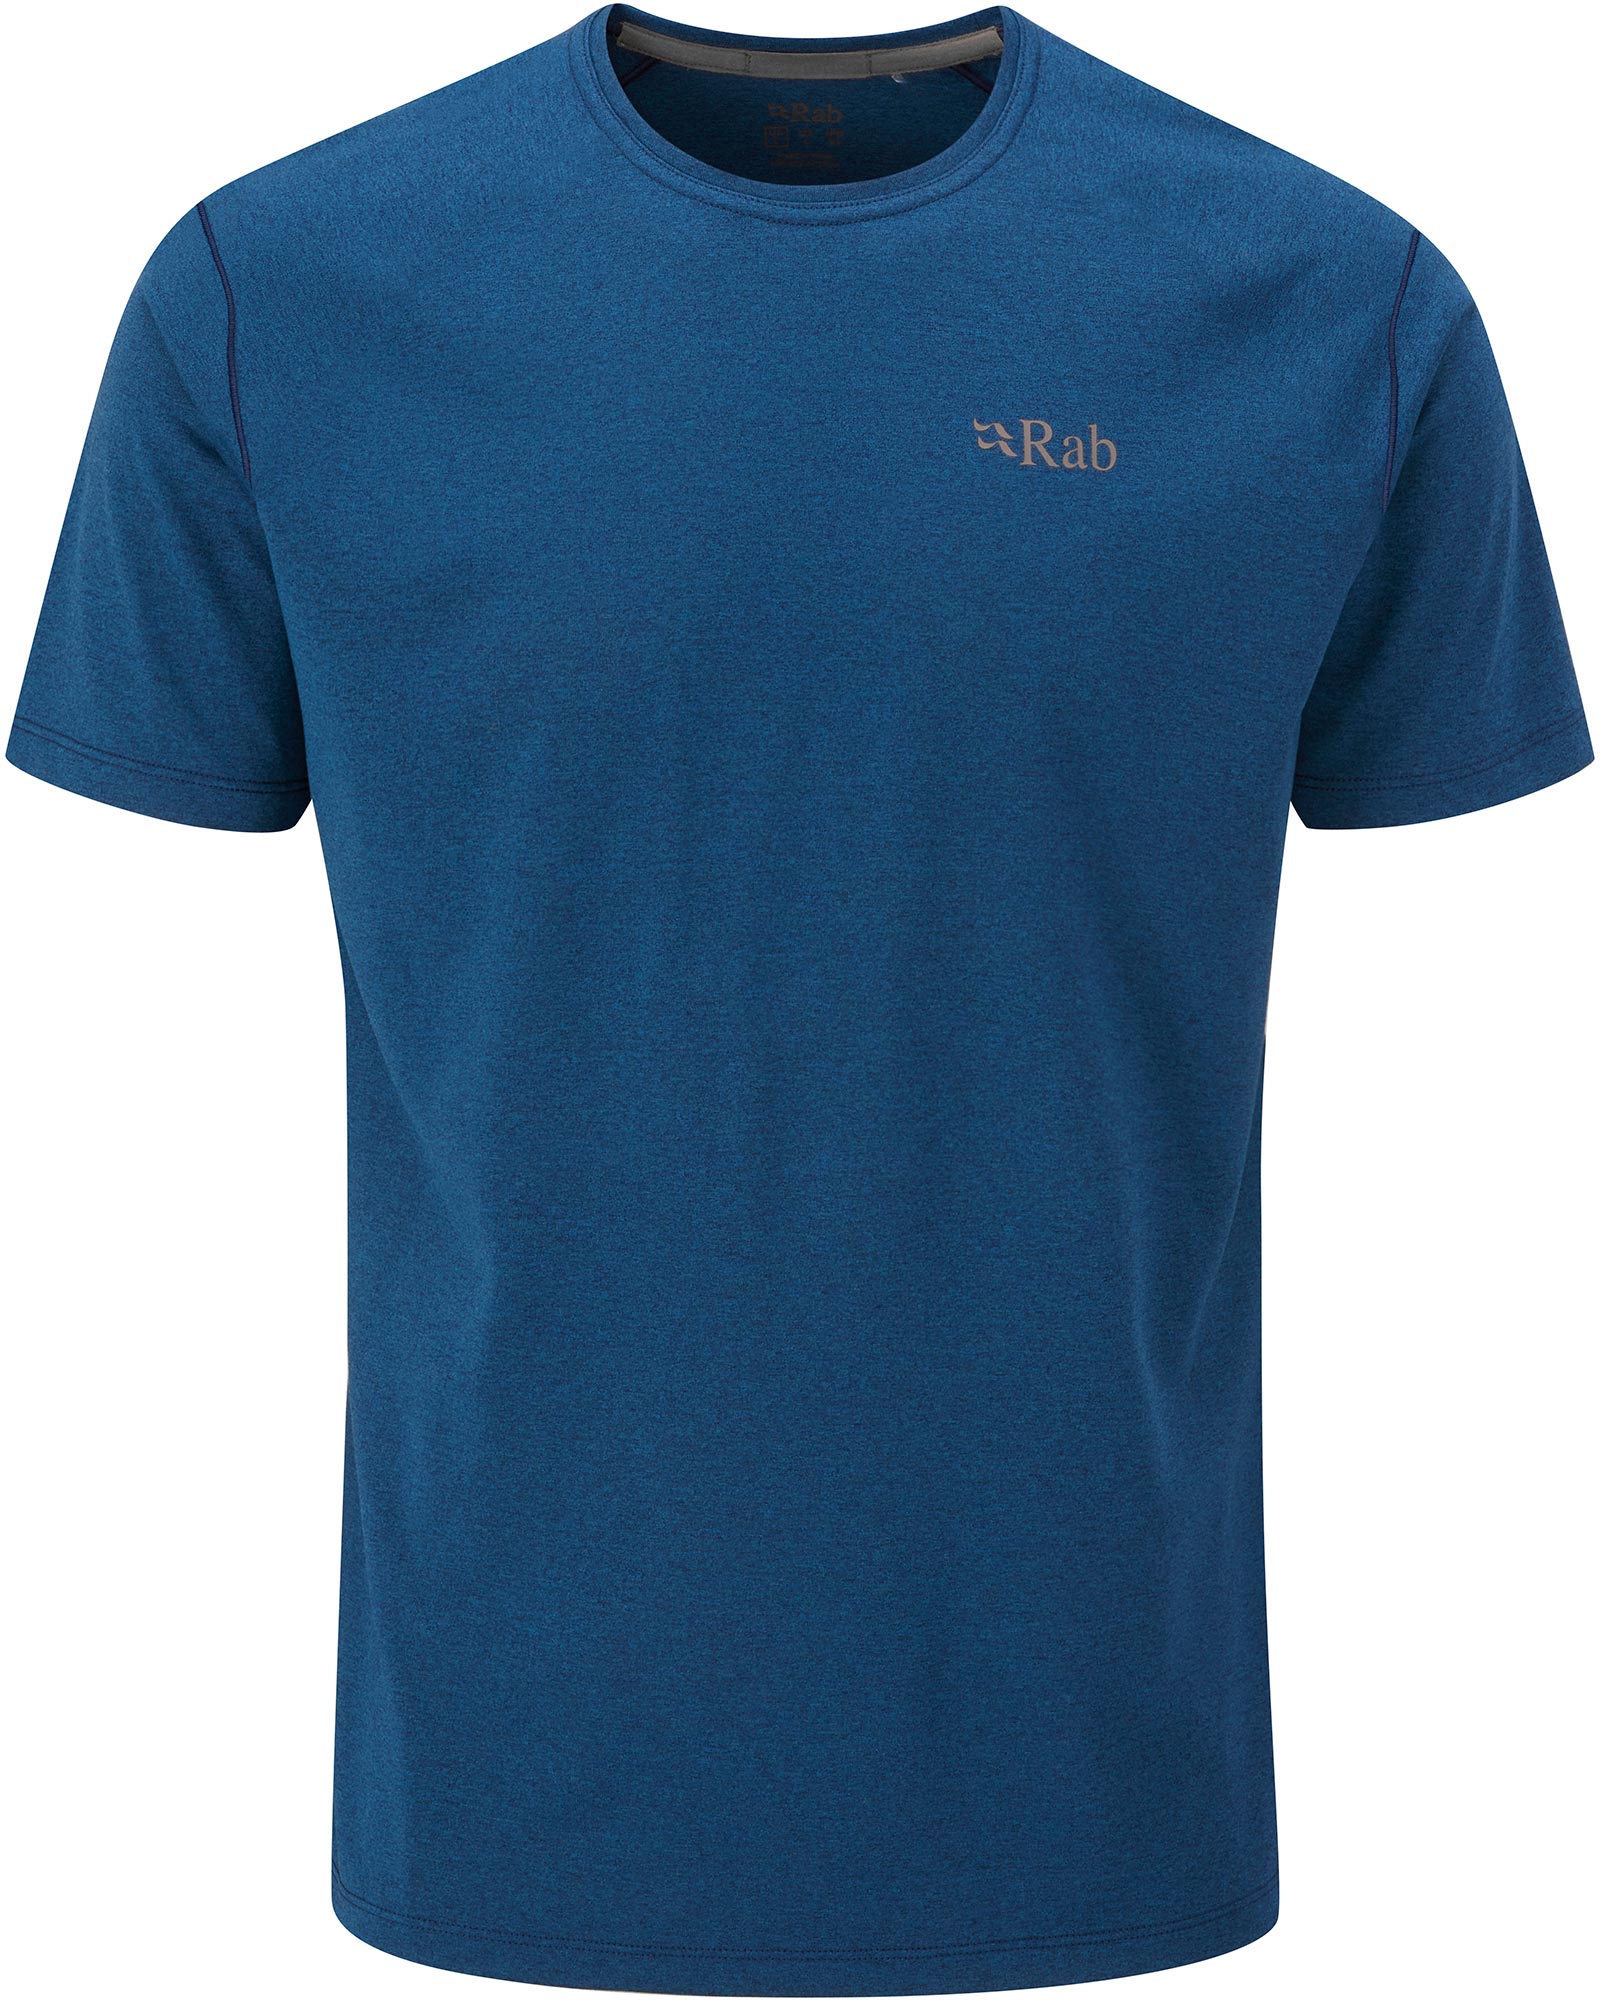 Product image of Rab Mantle Men's T-Shirt